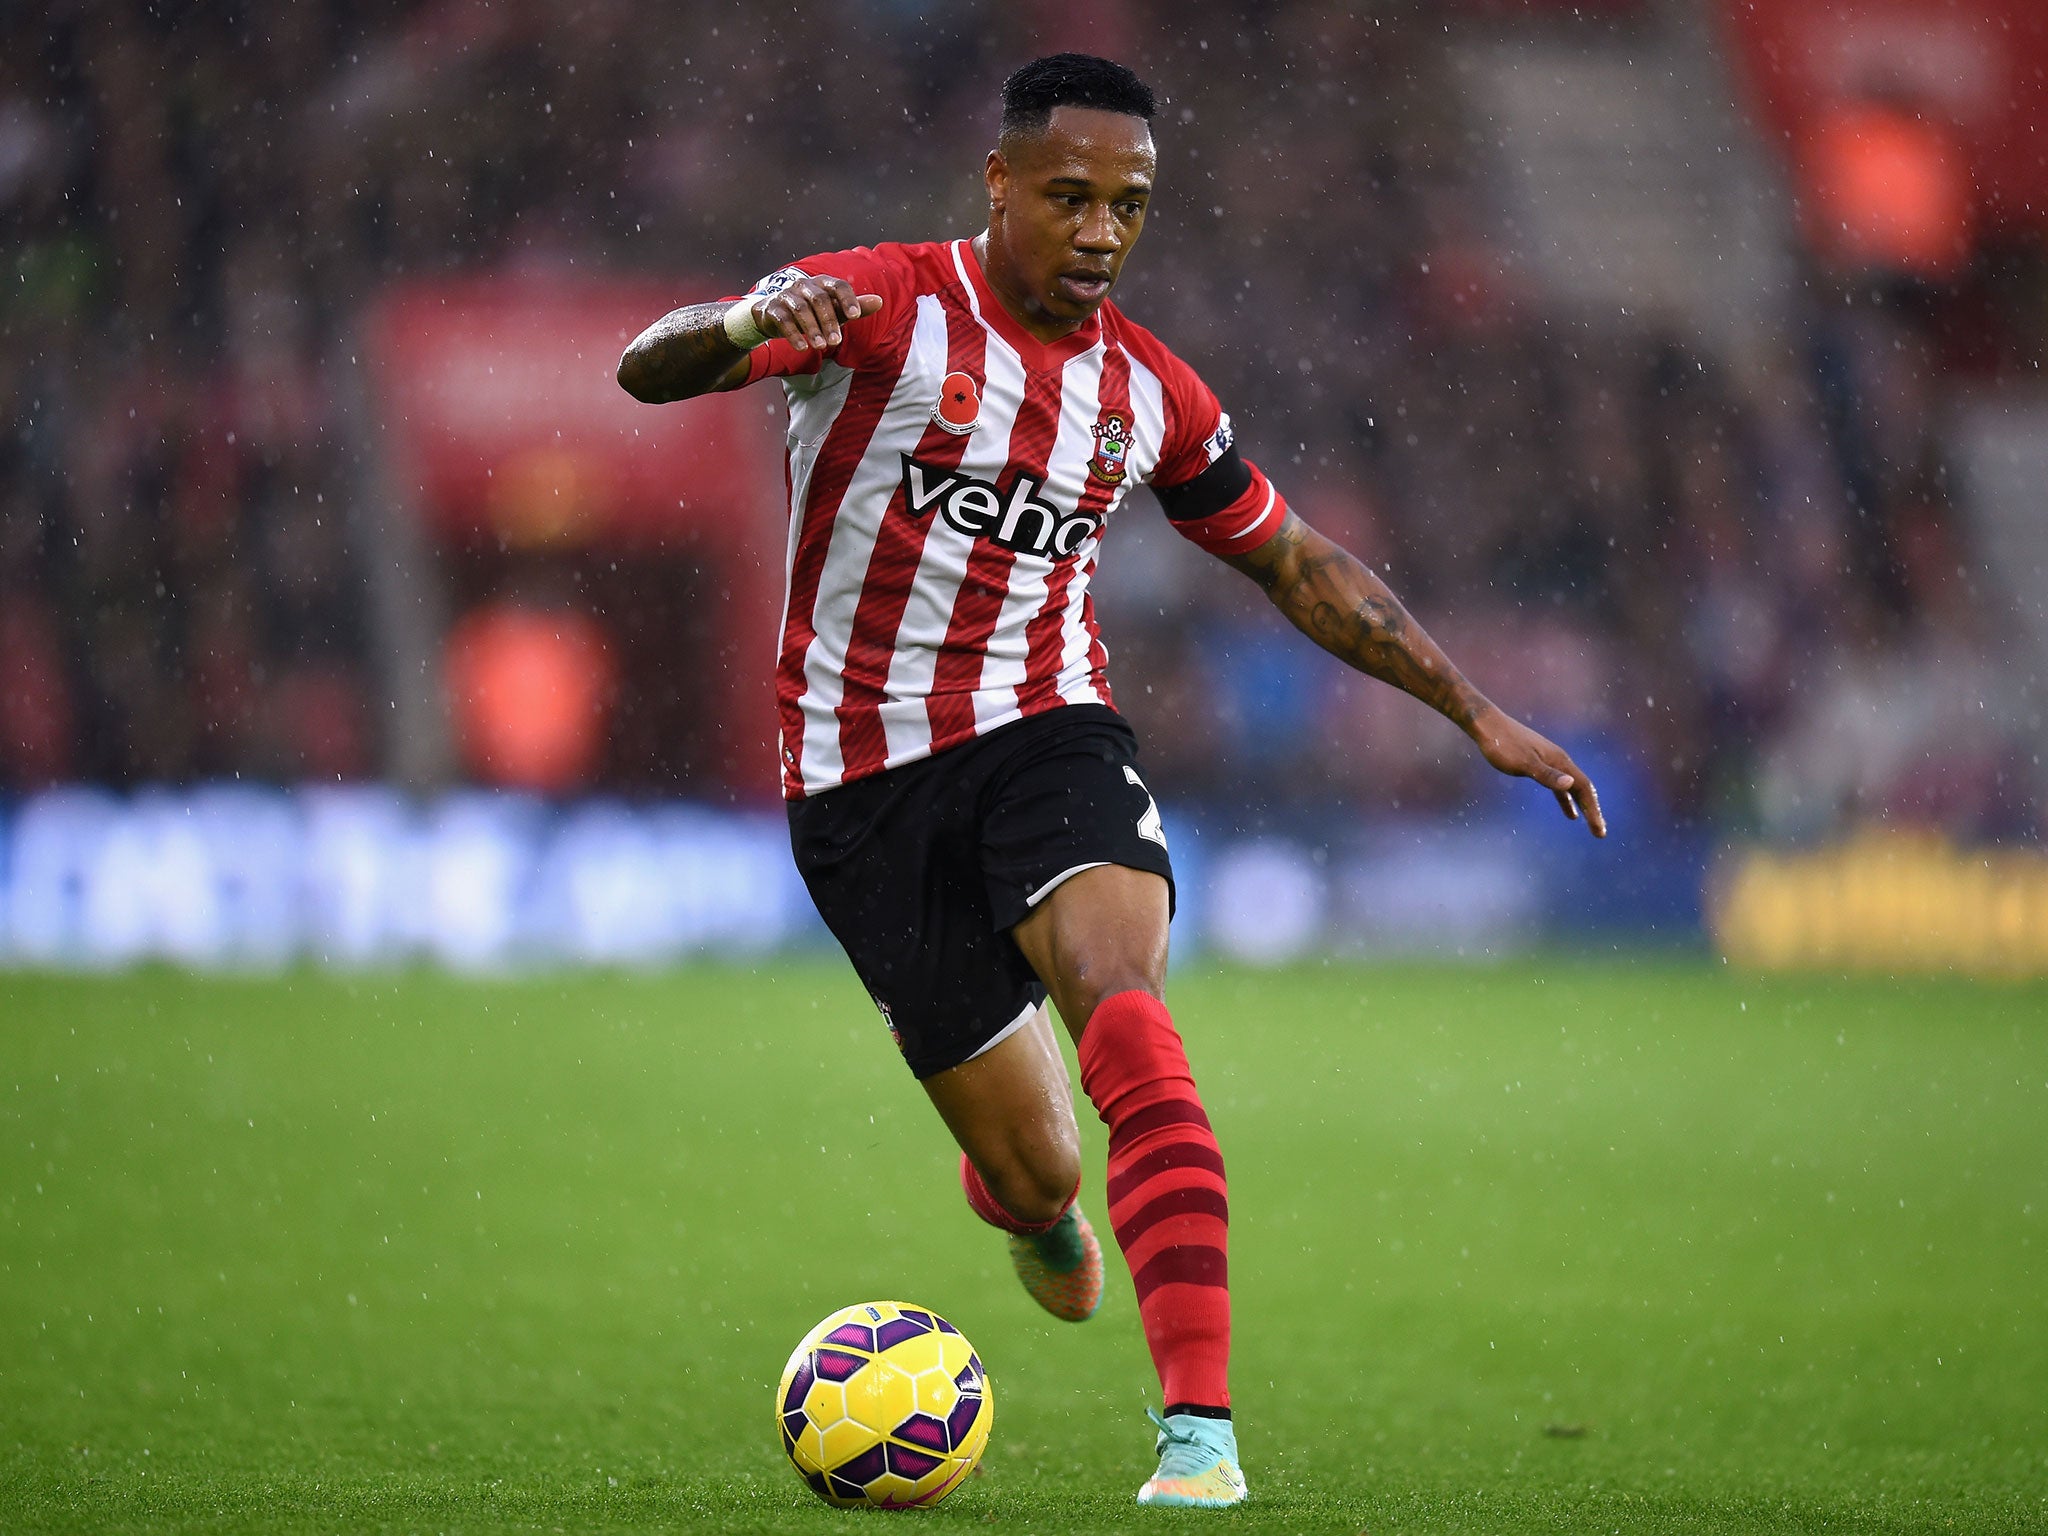 Clyne has played every minute in the Premier League this season